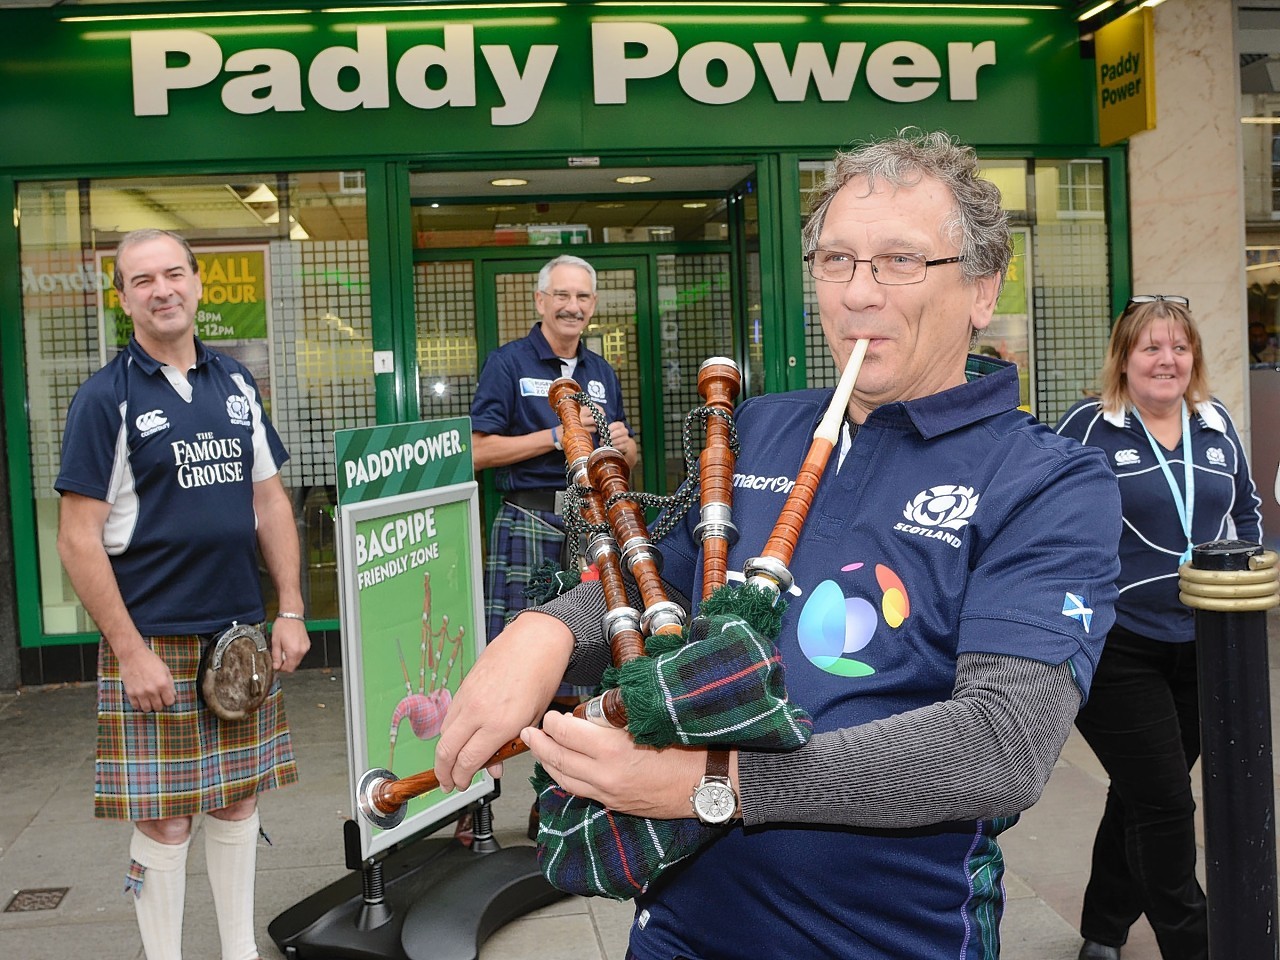 Paddy Power turned their Southgate Street shop in Gloucester into a bagpipe friendly zone ahead of Scotland v Japan after tournament organisers banned them